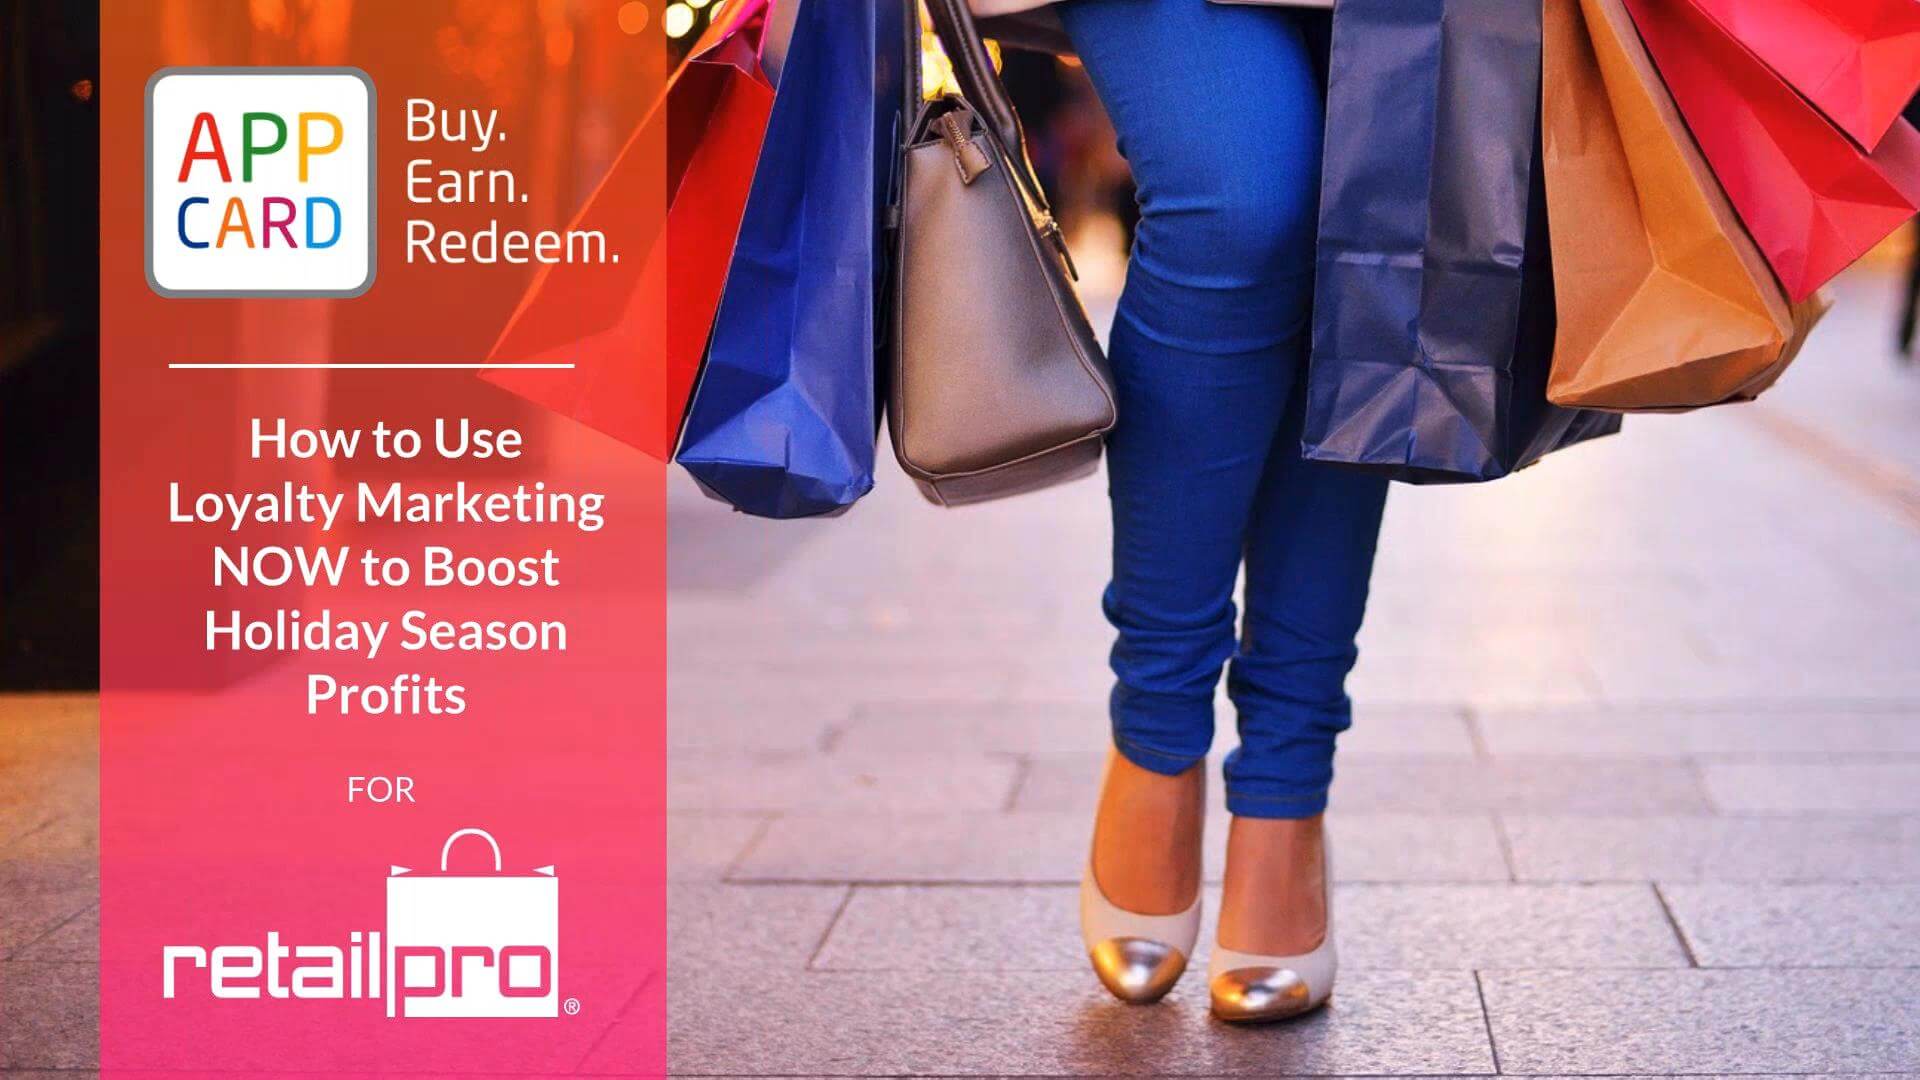 How to Use Loyalty Marketing NOW to Boost Holiday Season Profits